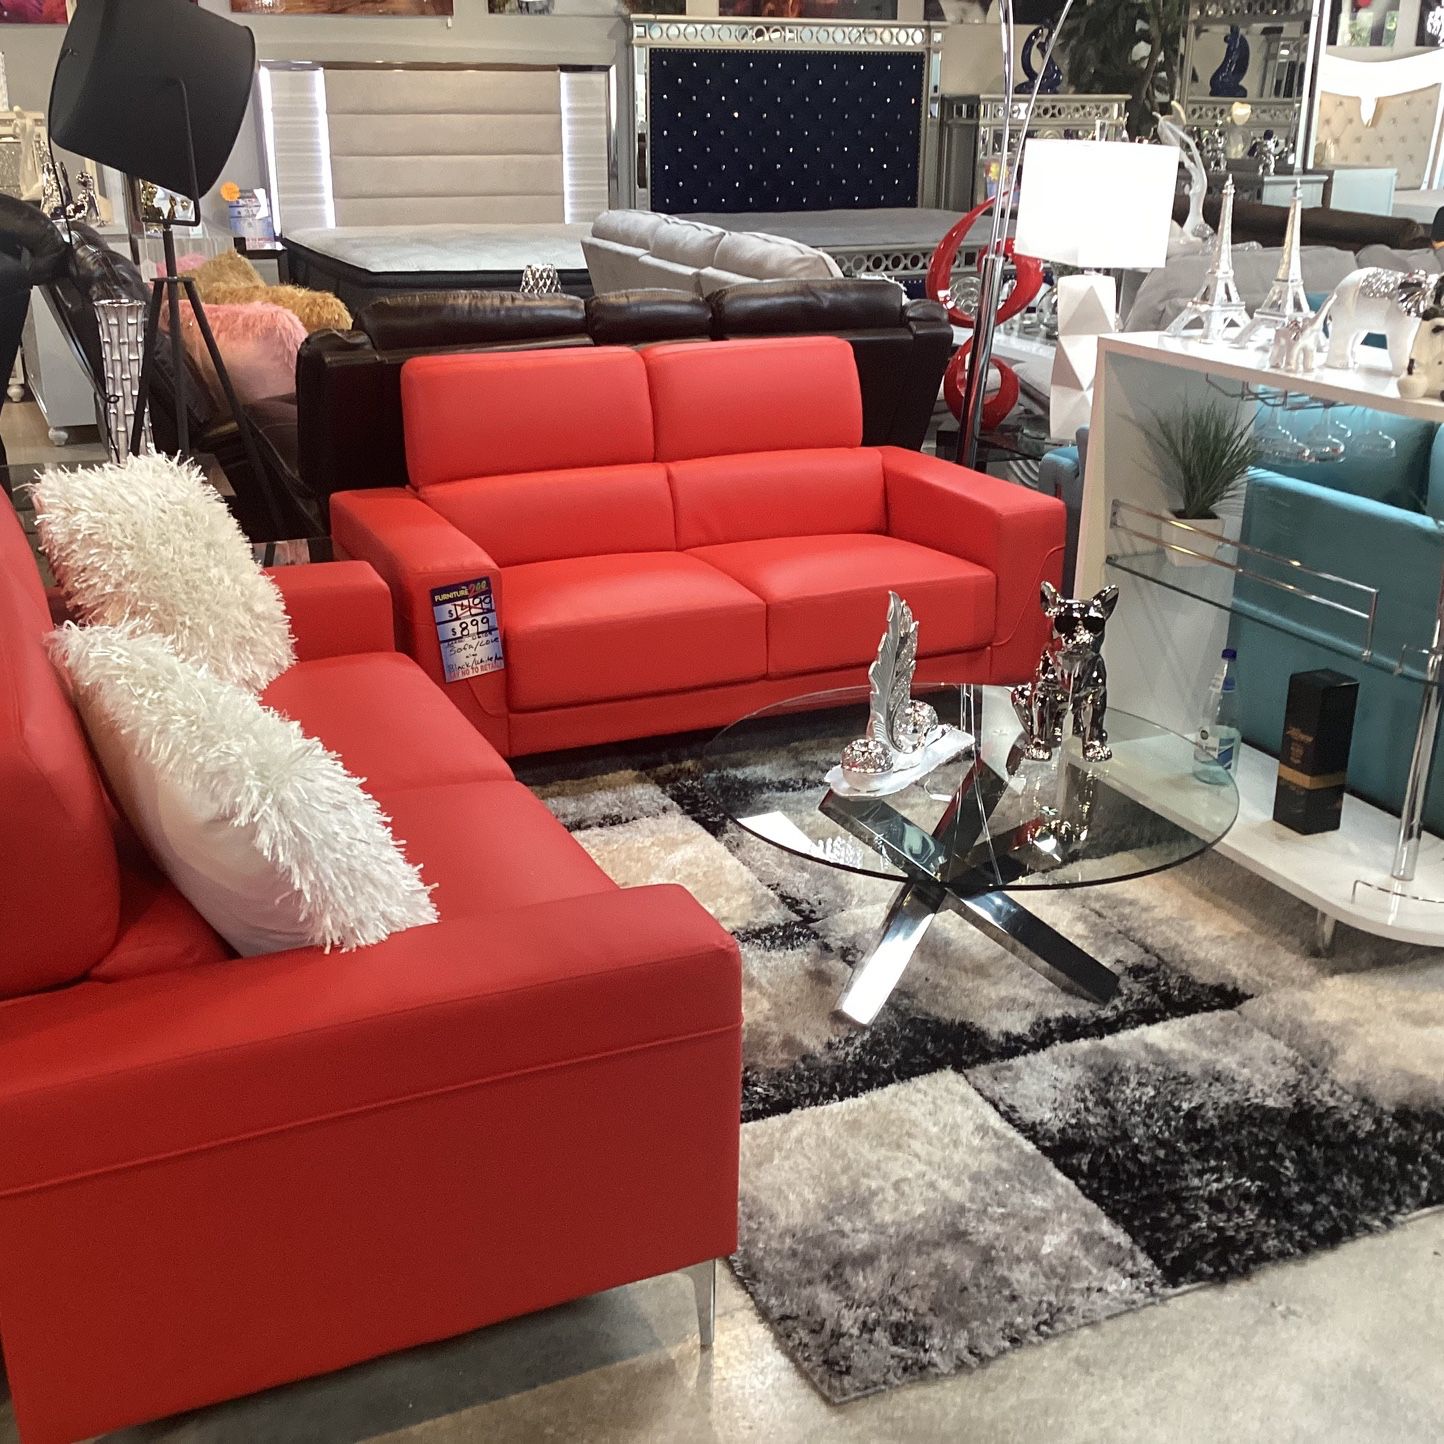 Beautiful Furniture Sofa & Loveseat On Sale Now For $$699. Color Blk/Gry/Red Are Available 